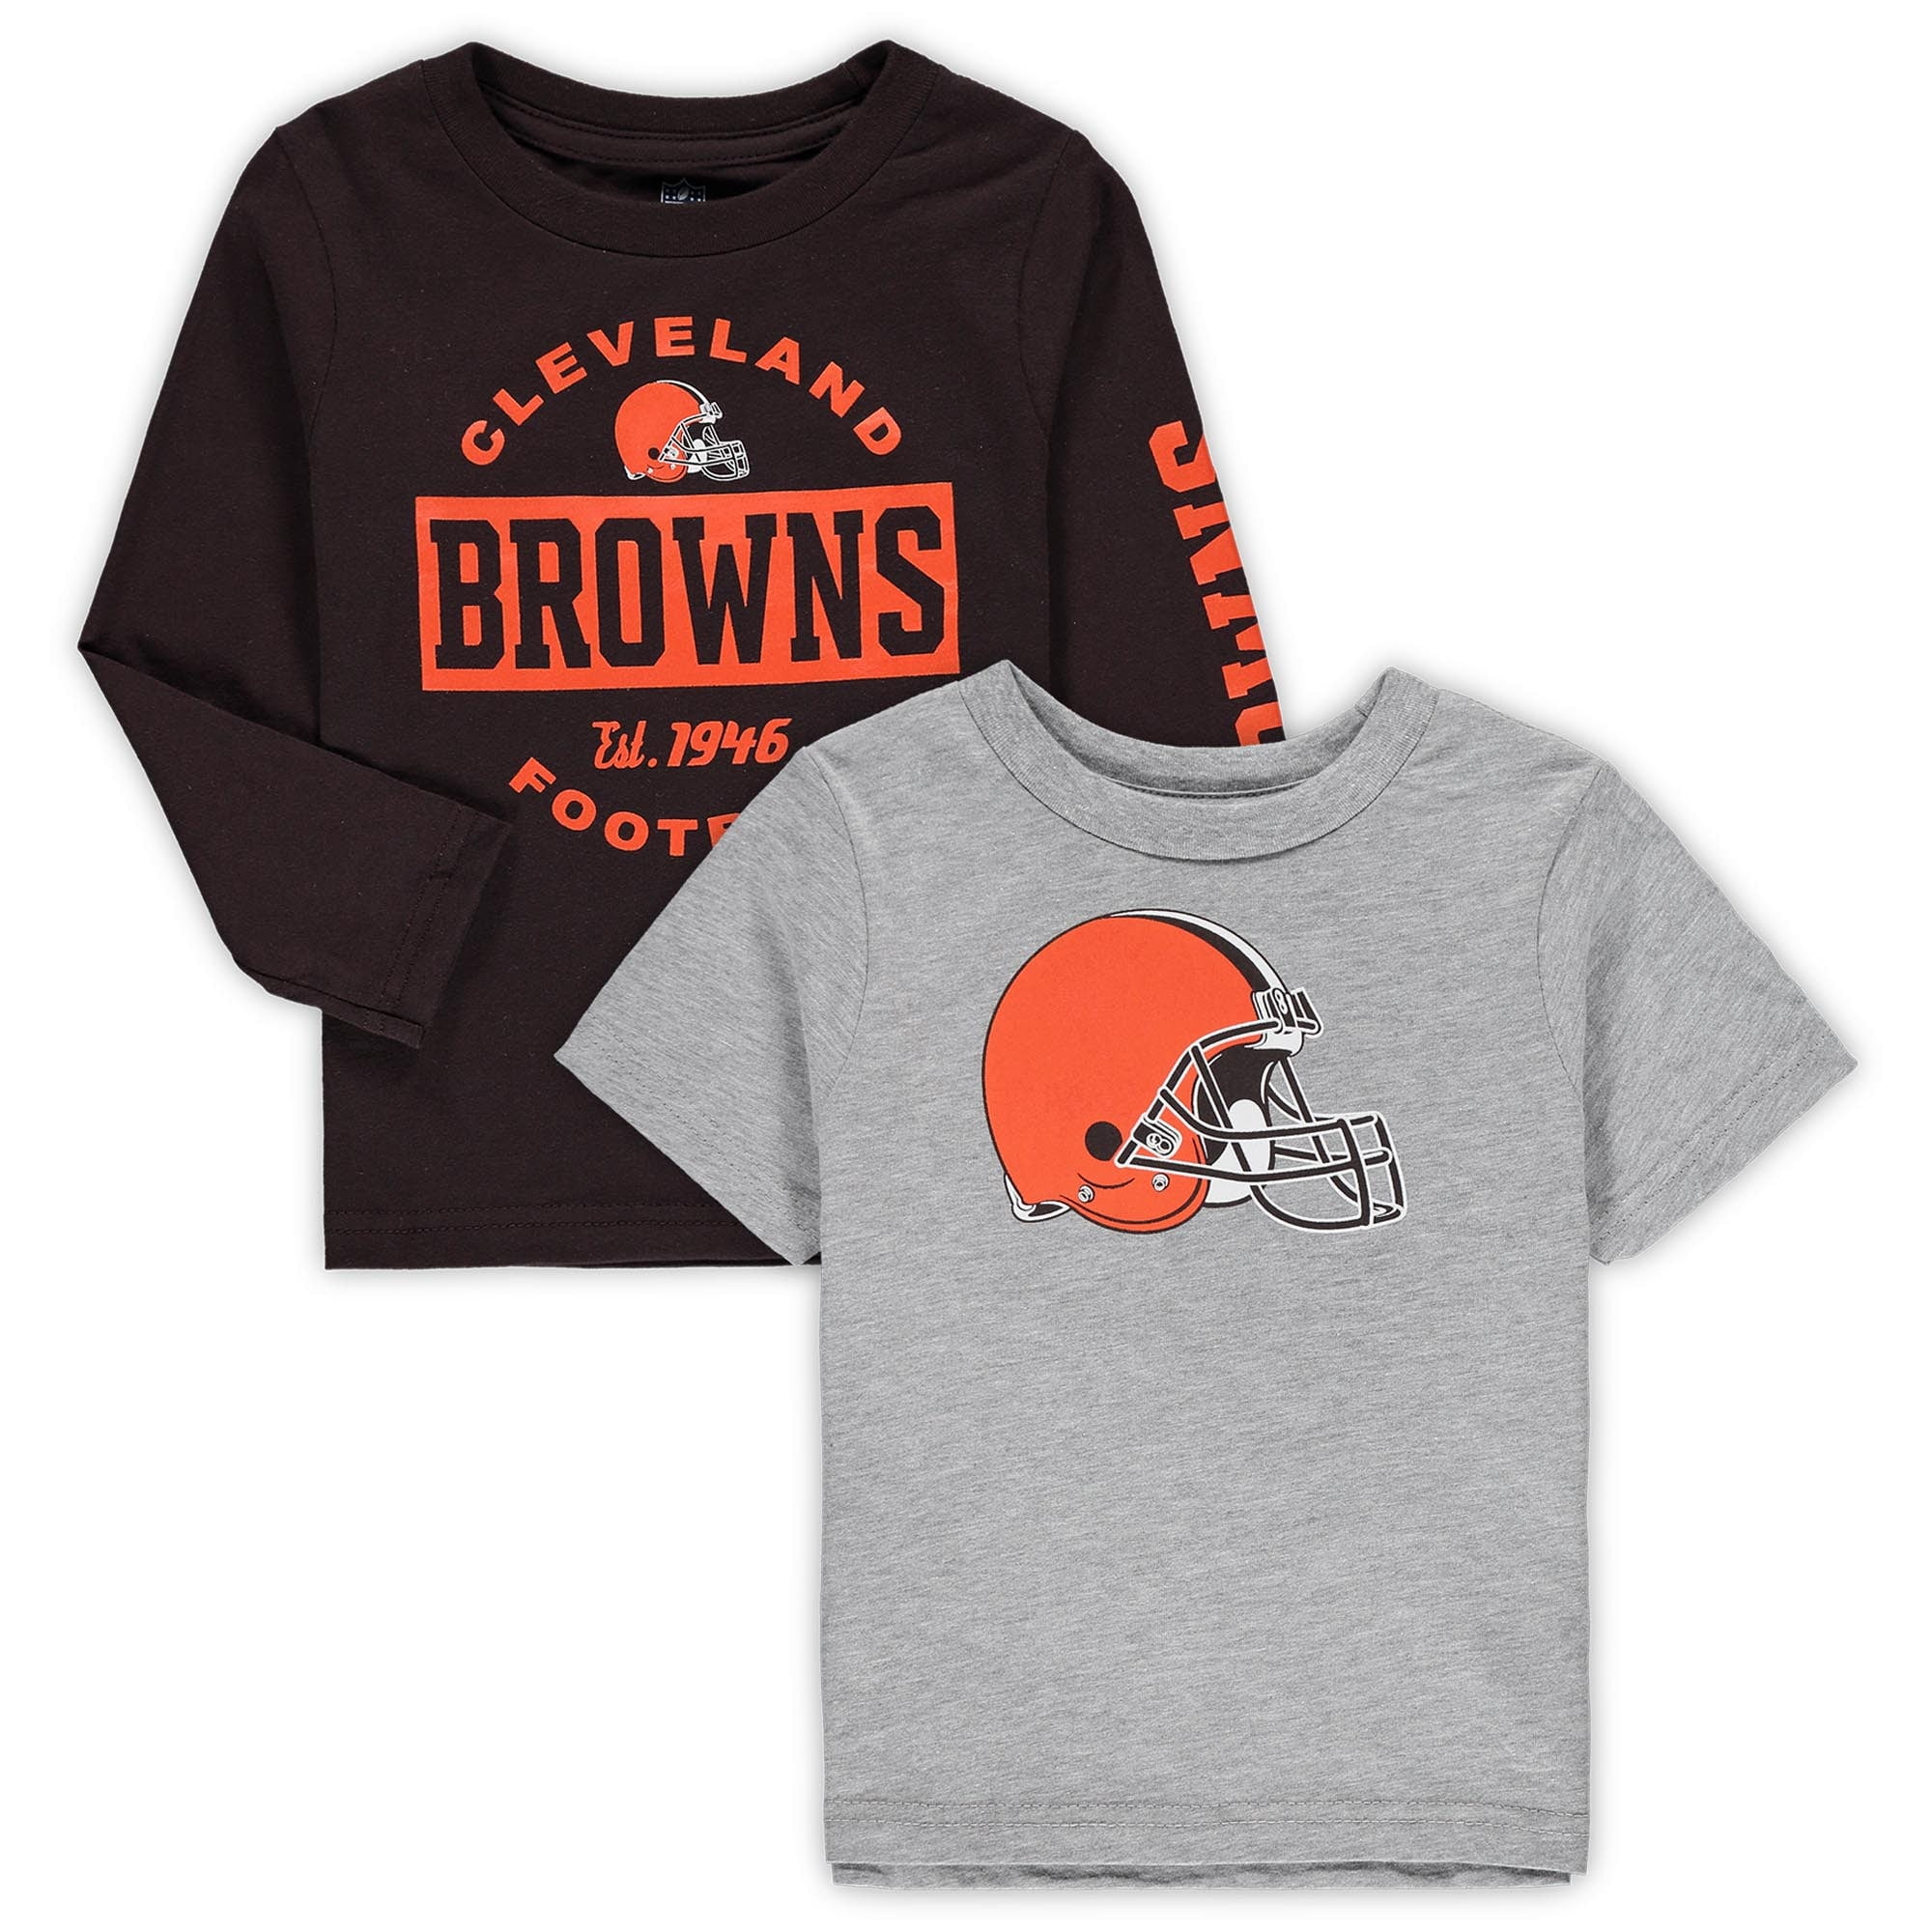 cleveland browns toddler jersey